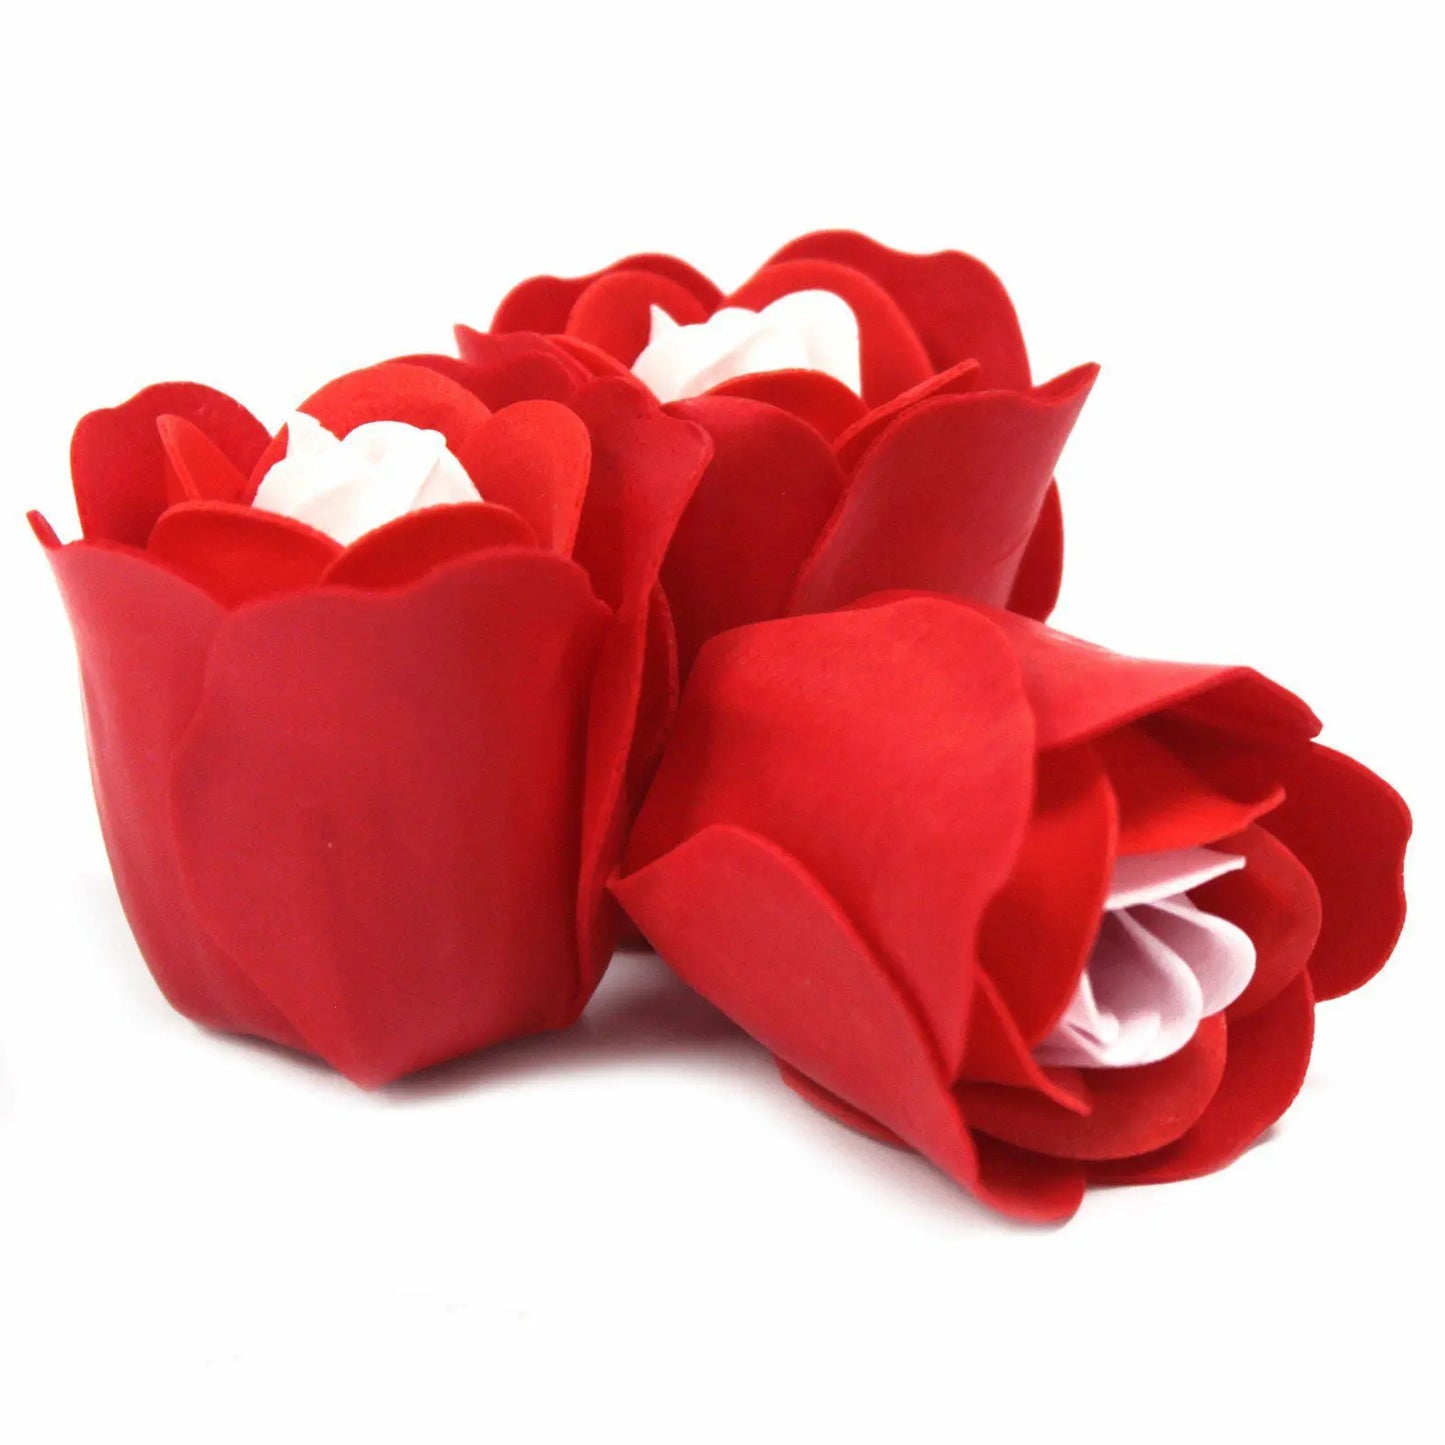 Bath/Giftset/Pamper/Wedding/Favours -Set of 3 Soap Flower Heart Box - Red Roses Unbranded